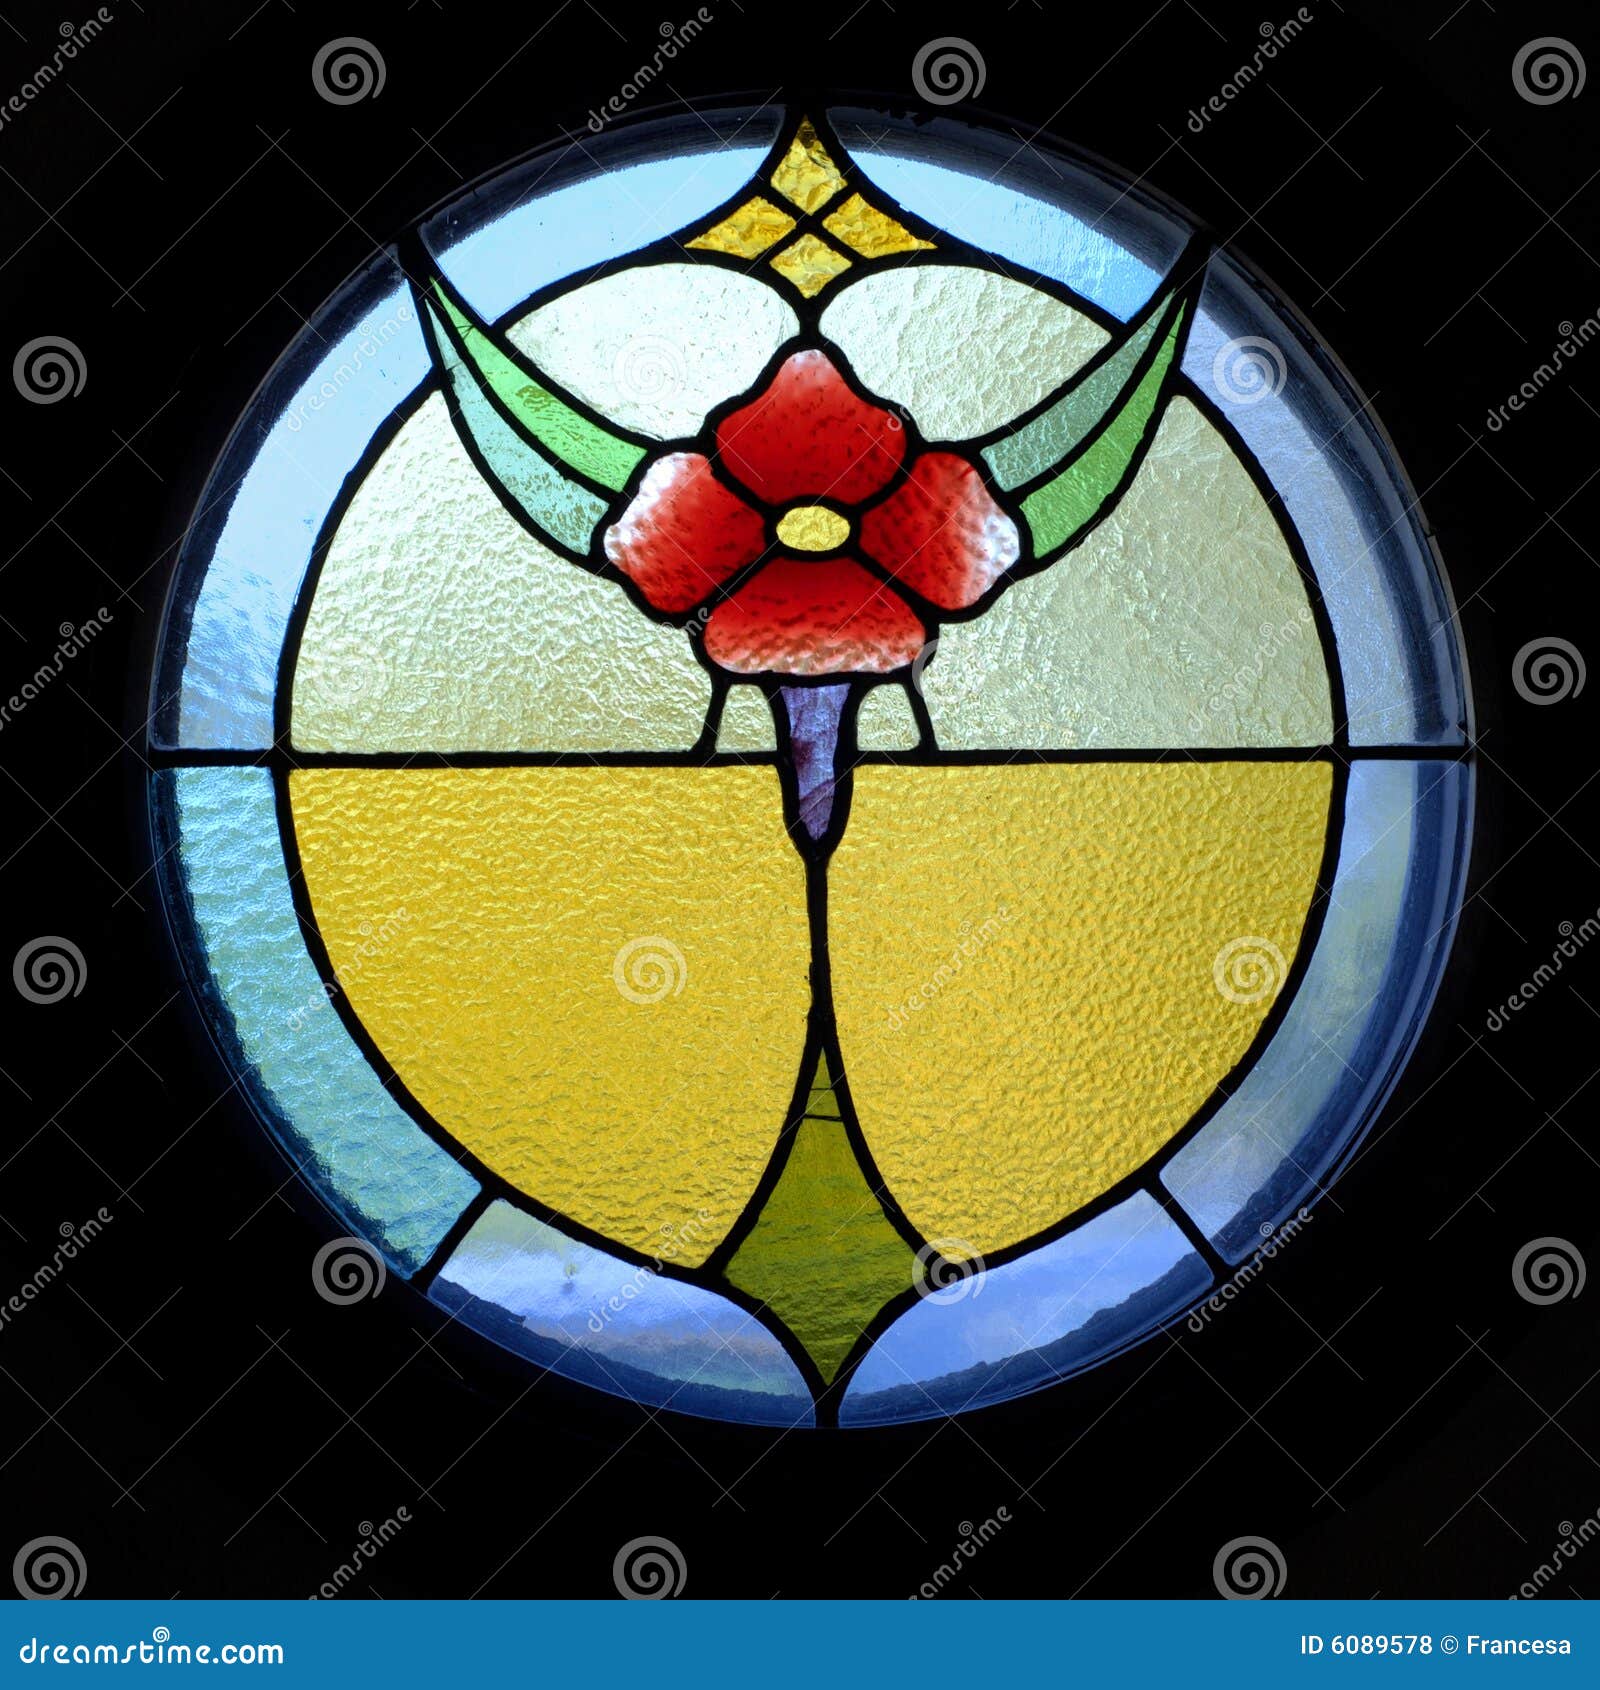 Stained Glass Flower. A stained glass window of a flower